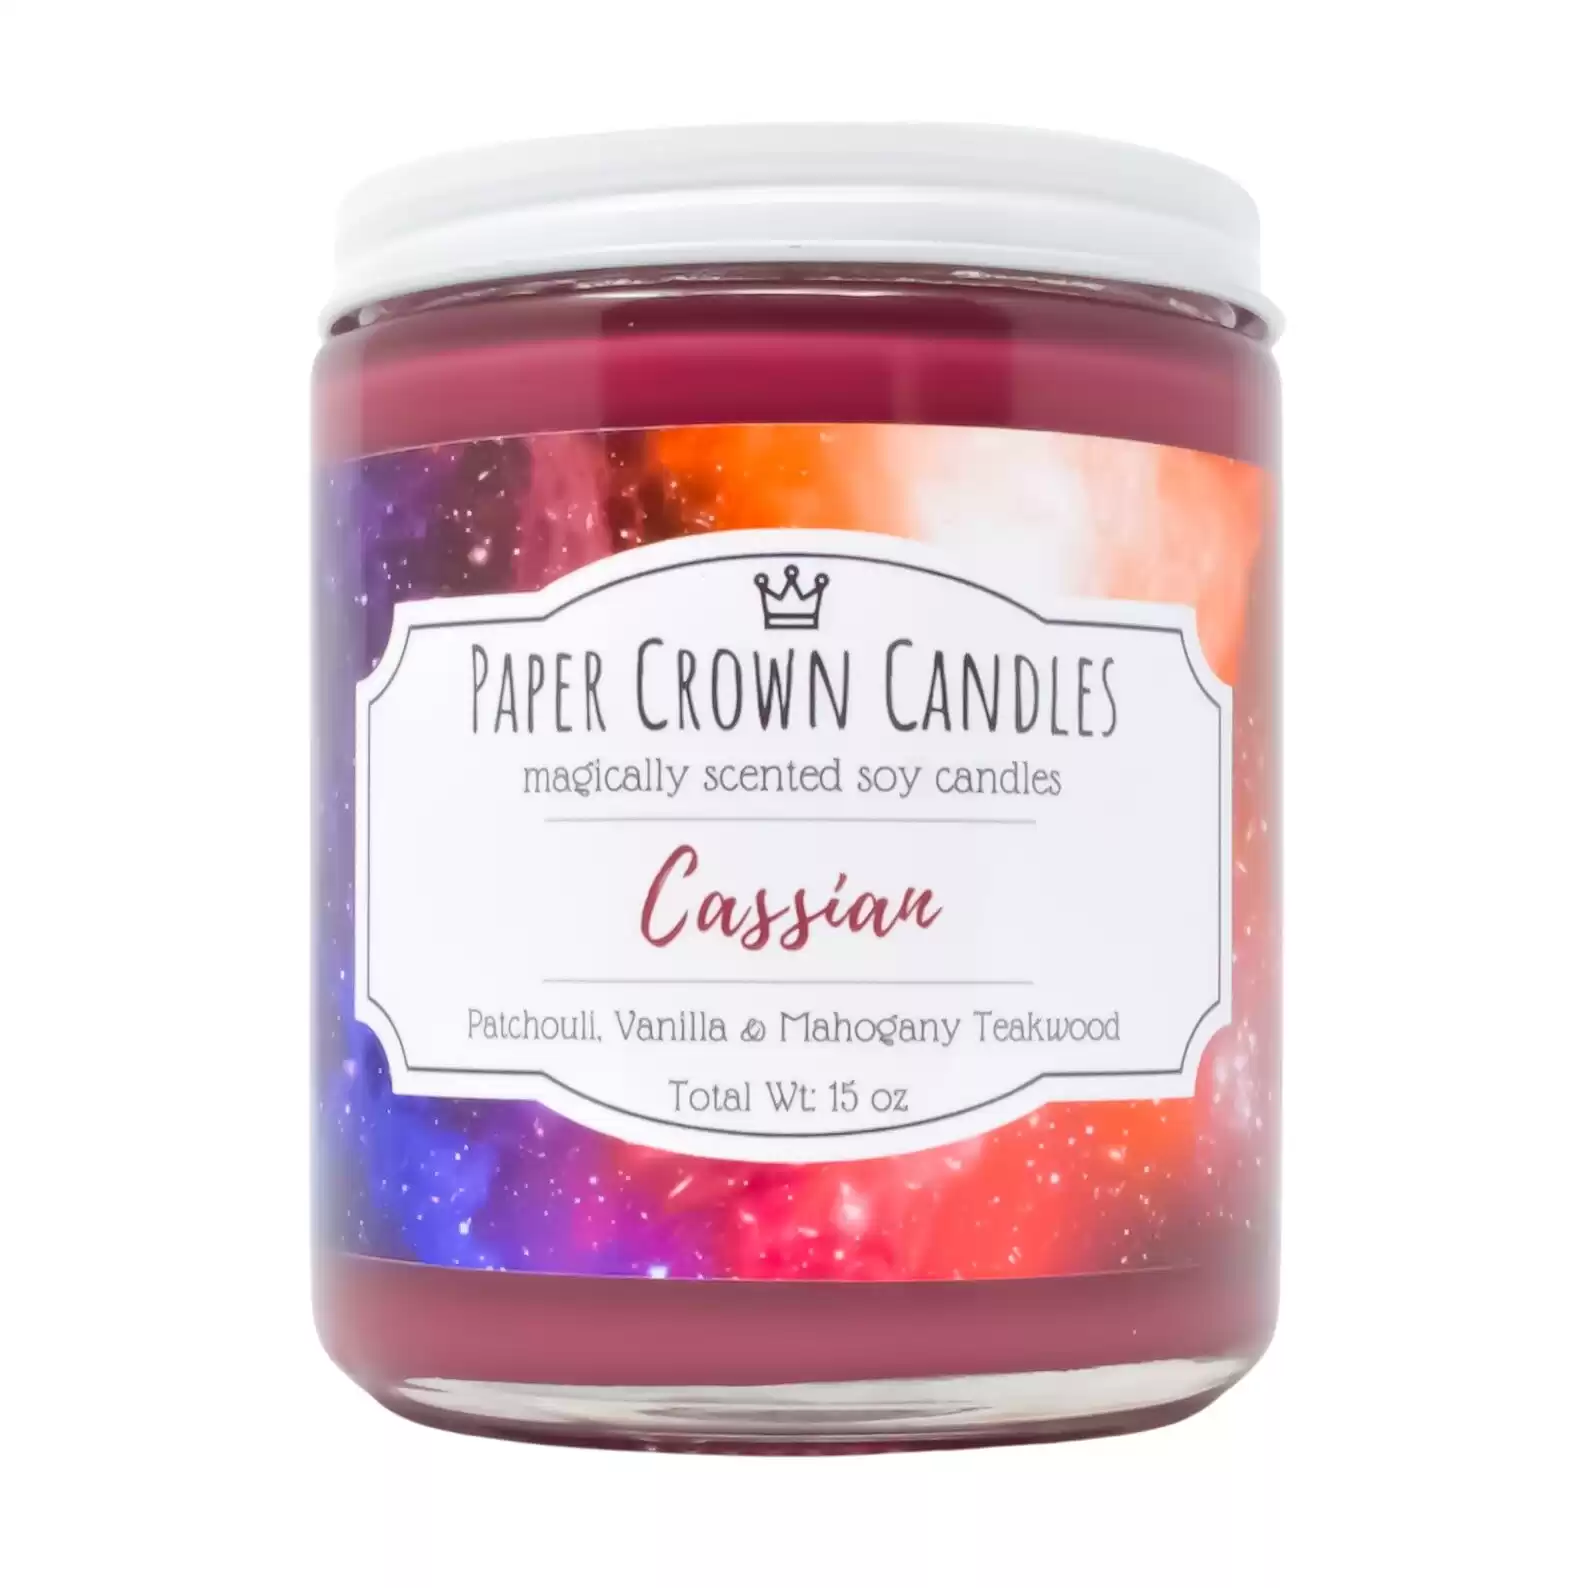 Cassian Bookish Soy Candle